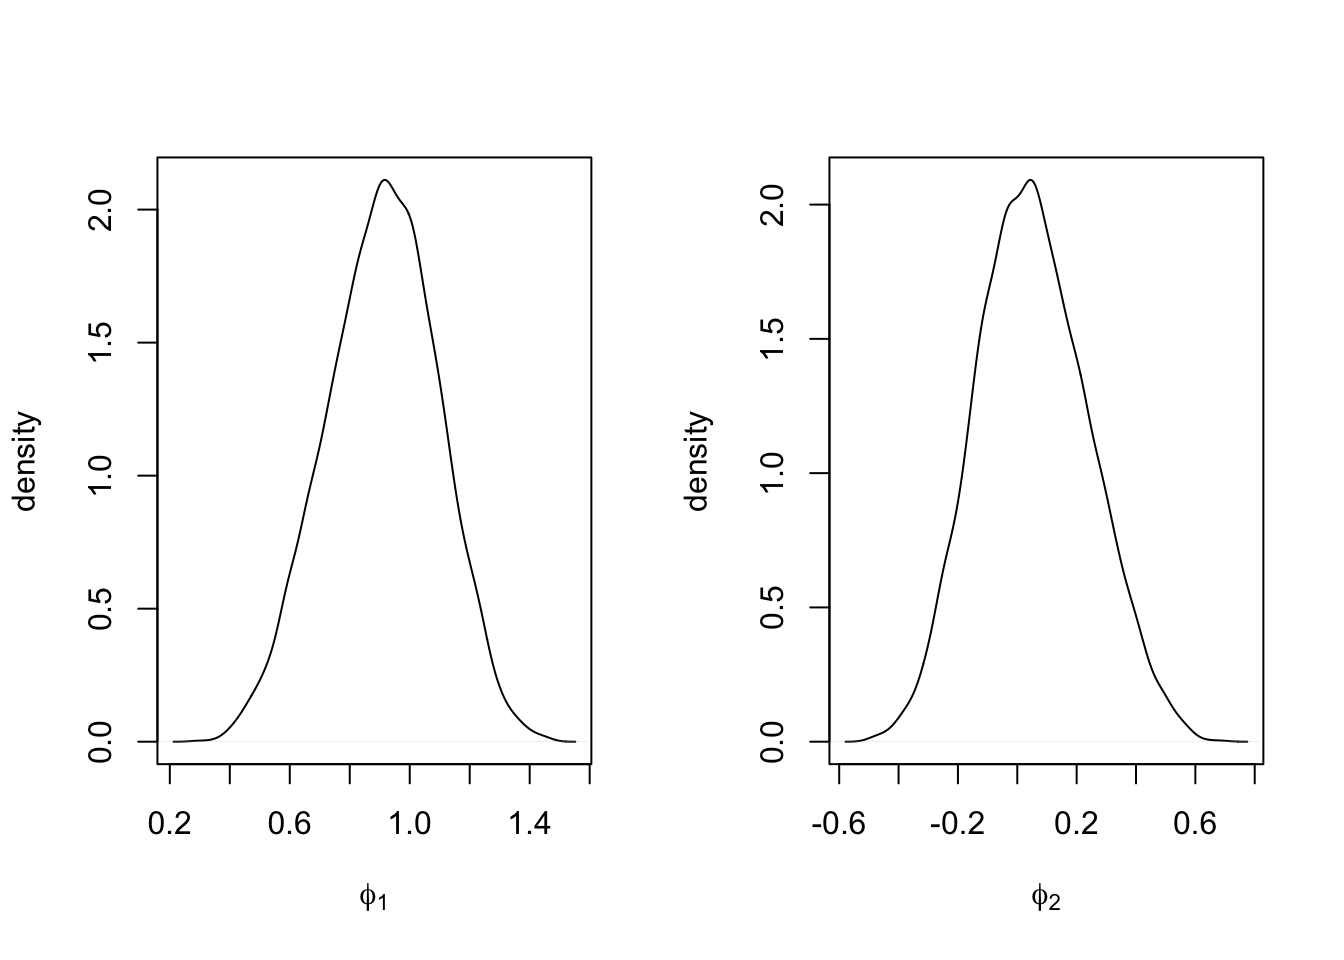 Marginal posterior densities of $\phi_1$ (left panel) and $\phi_2$ (right panel) under Model 4.